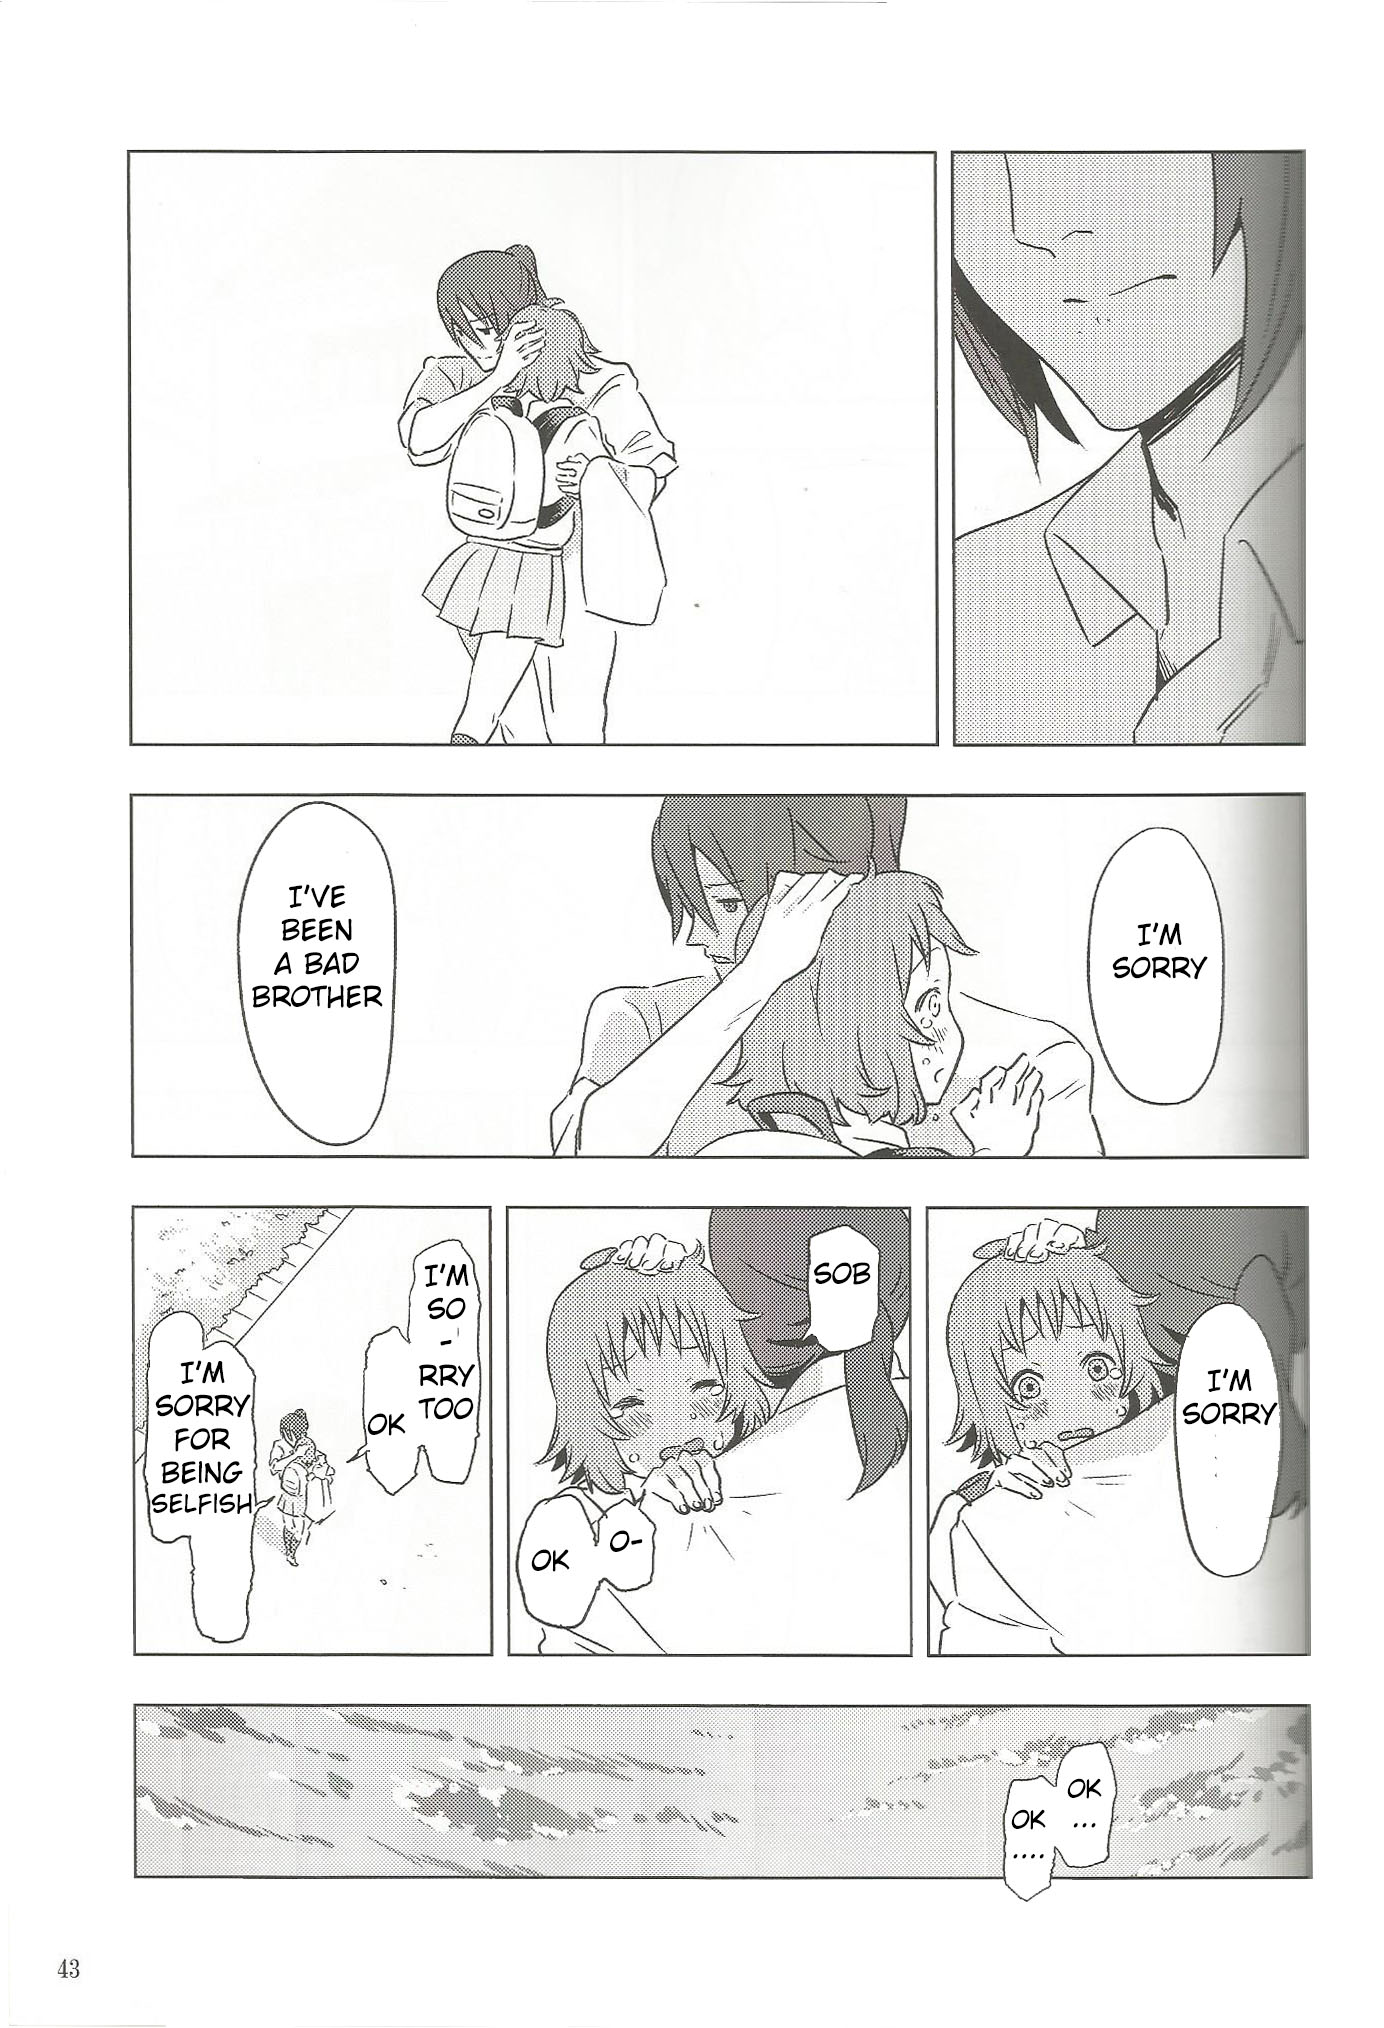 VOCALOID - Feelings Quickly Become Awkward (doujinshi) Ch.4